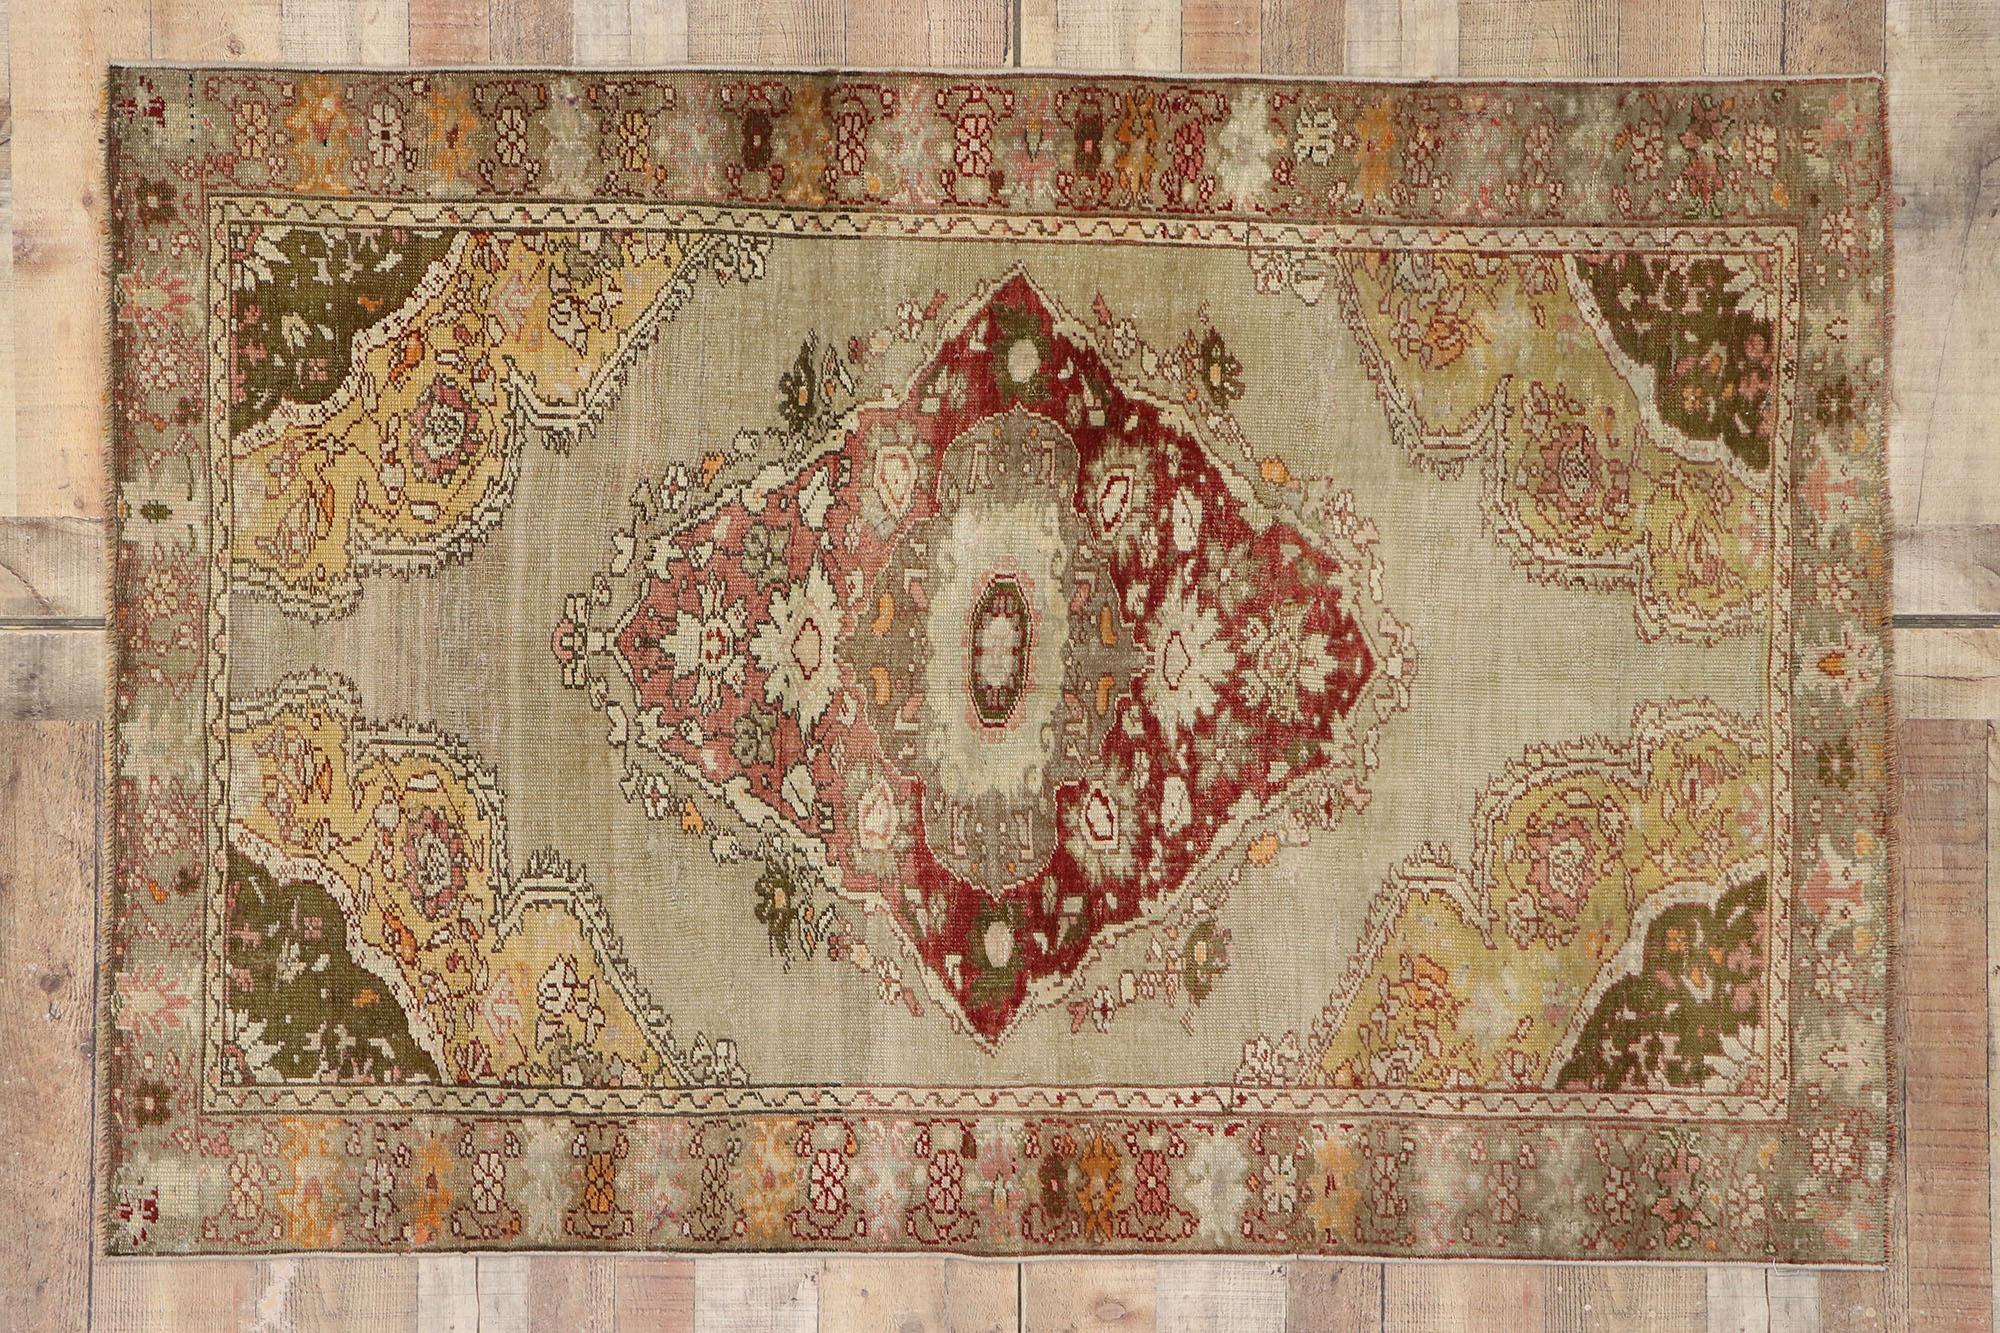 53273 vintage Turkish Oushak rug with Romantic Arts & Crafts style. This hand knotted wool vintage Turkish Oushak rug features a diamond-shaped medallion floating on an abrashed warm brown-taupe field. A delicate floral garland elegantly runs along